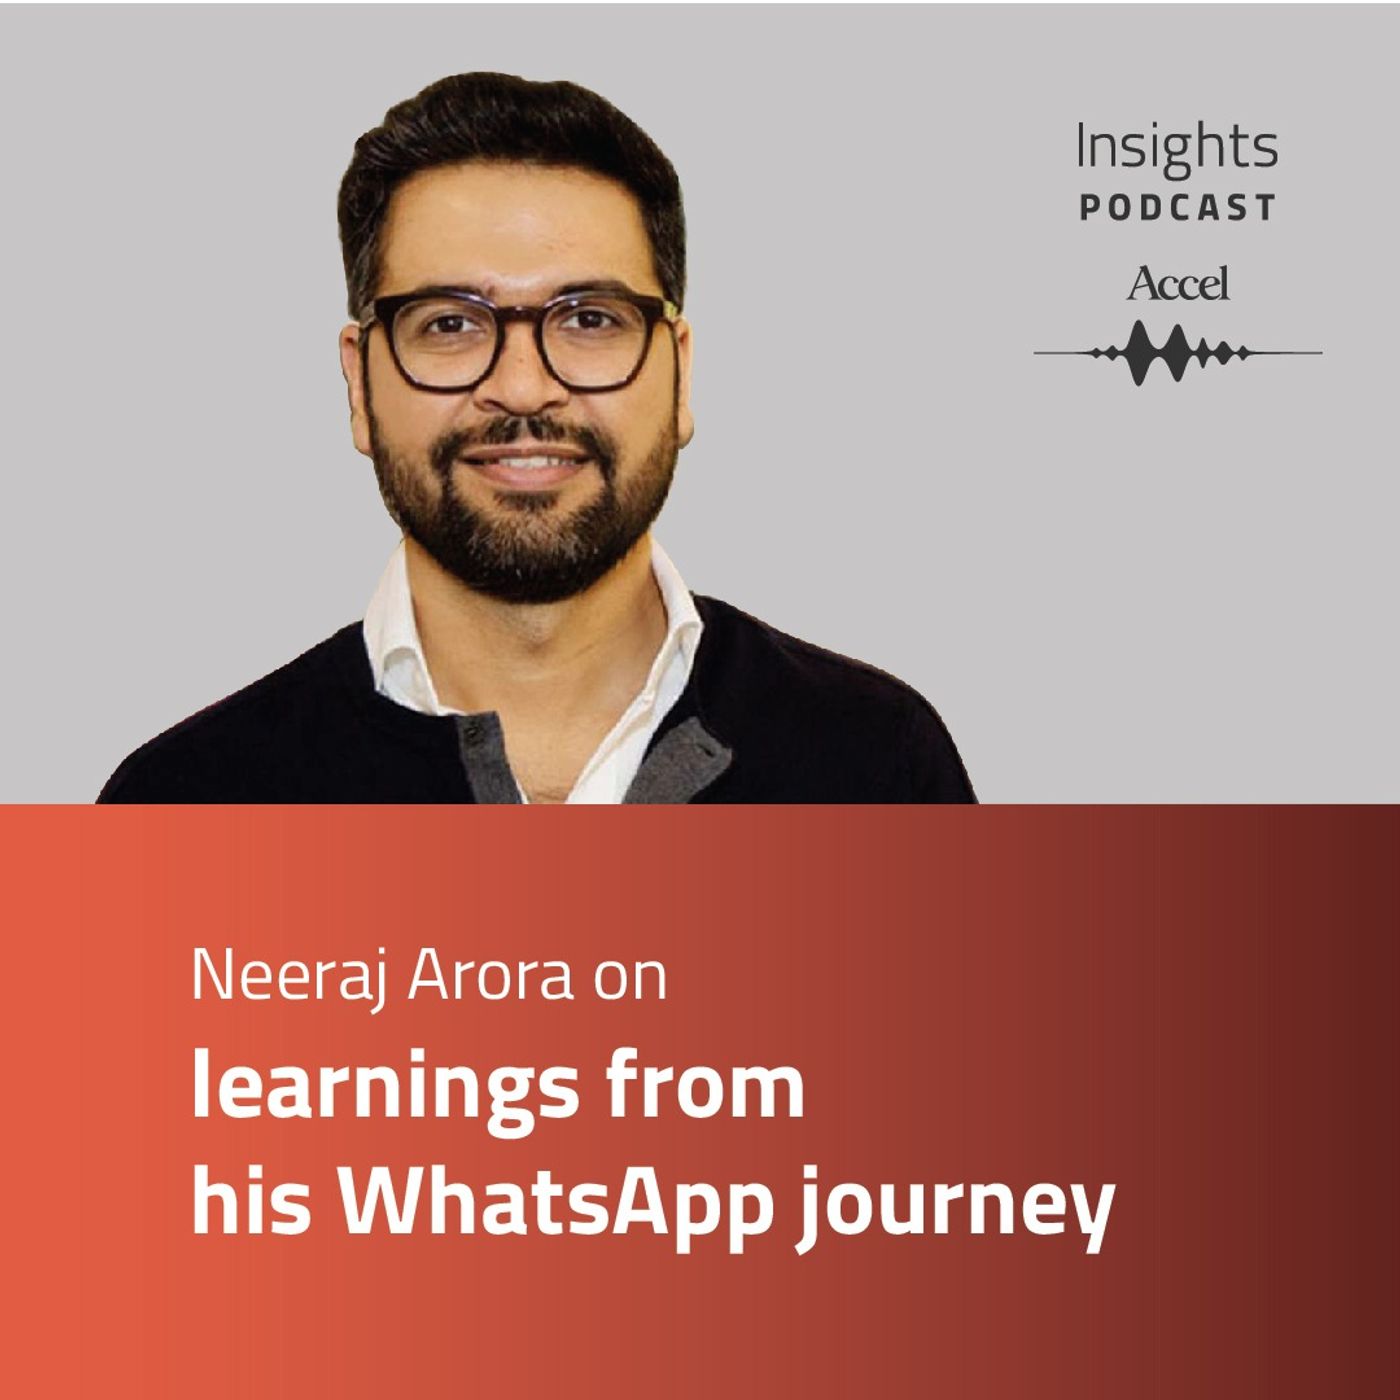 INSIGHTS #53 – Neeraj Arora on learnings from his WhatsApp journey